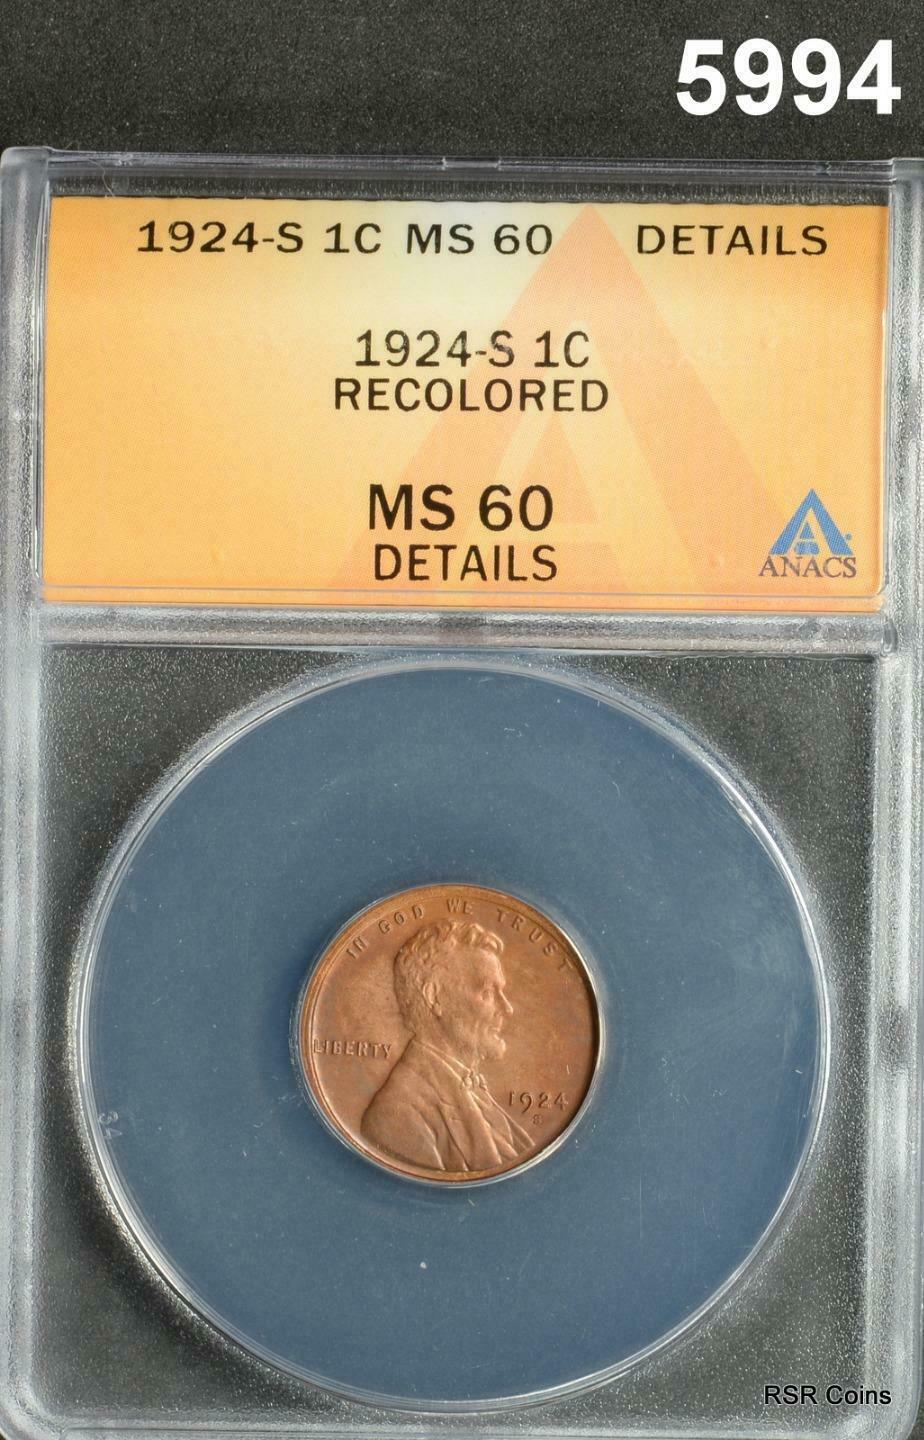 1924 S LINCOLN CENT ANACS CERTIFIED MS60 RECOLORED BETTER DATE! #5994